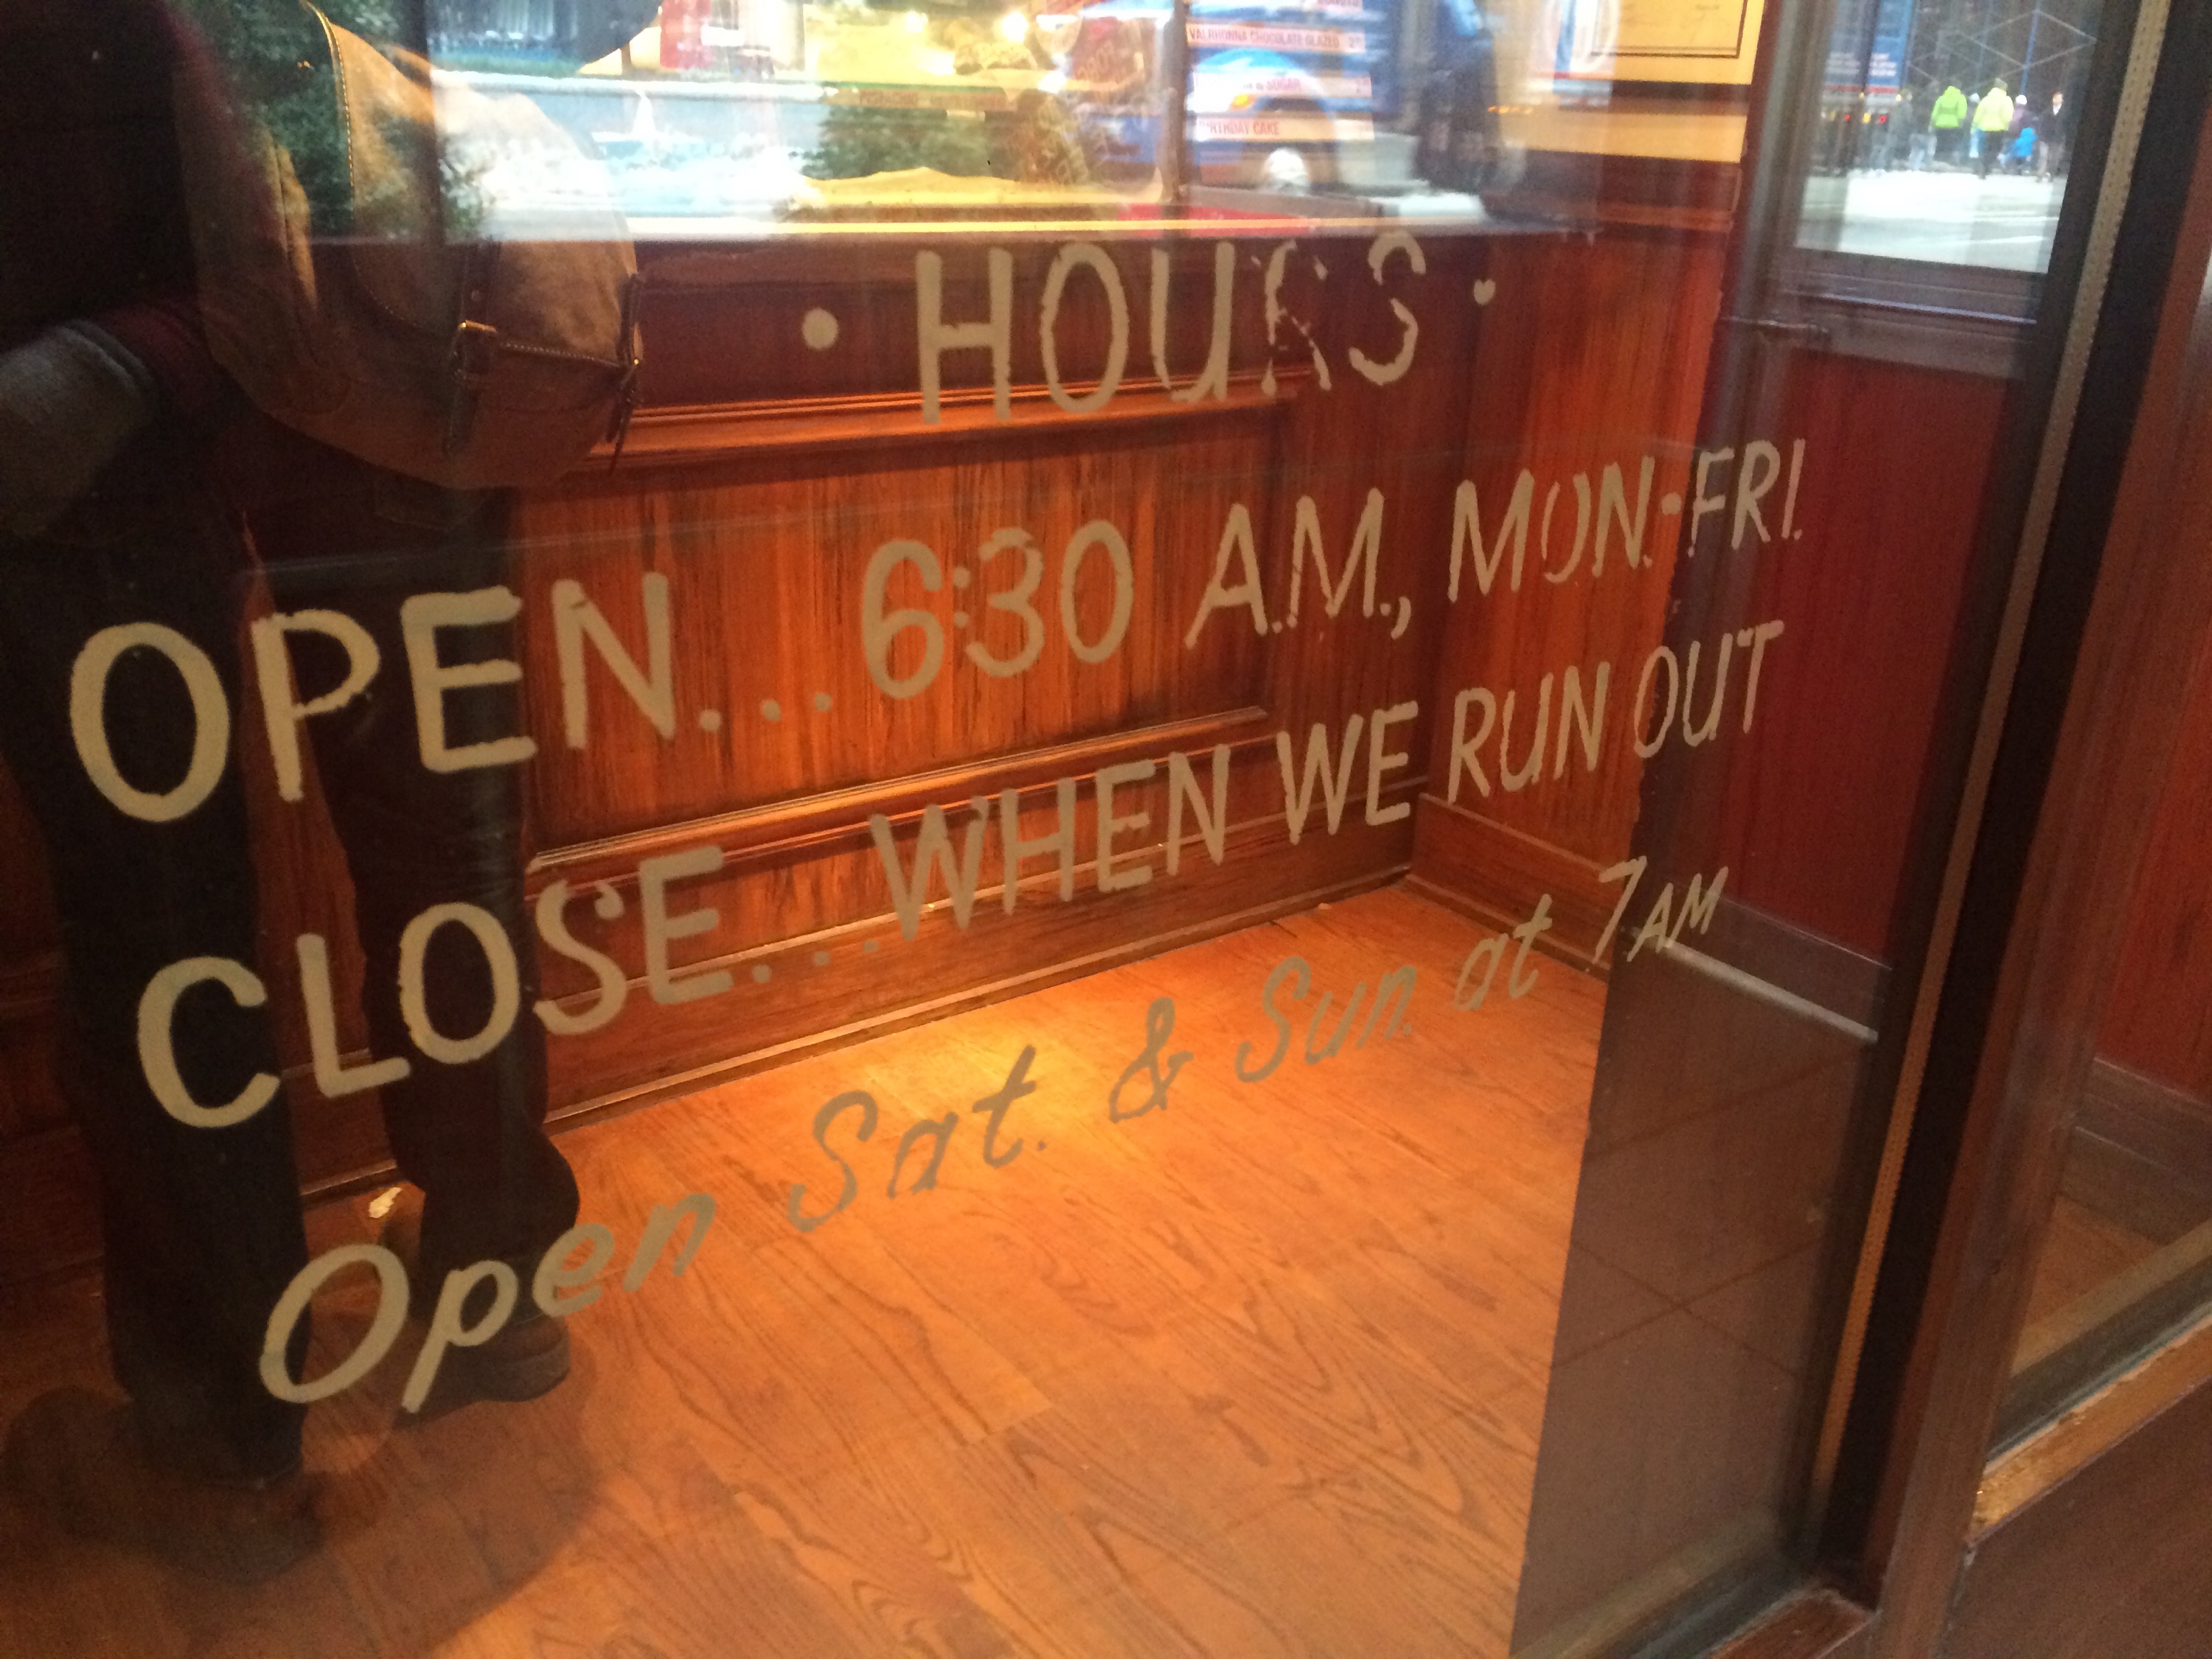 the image is of the front window of the store, showing the hours of operation as: OPEN 6:30AM, Mon-FRI, CLOSE: when we run out, Open Sat & Sun at 7am